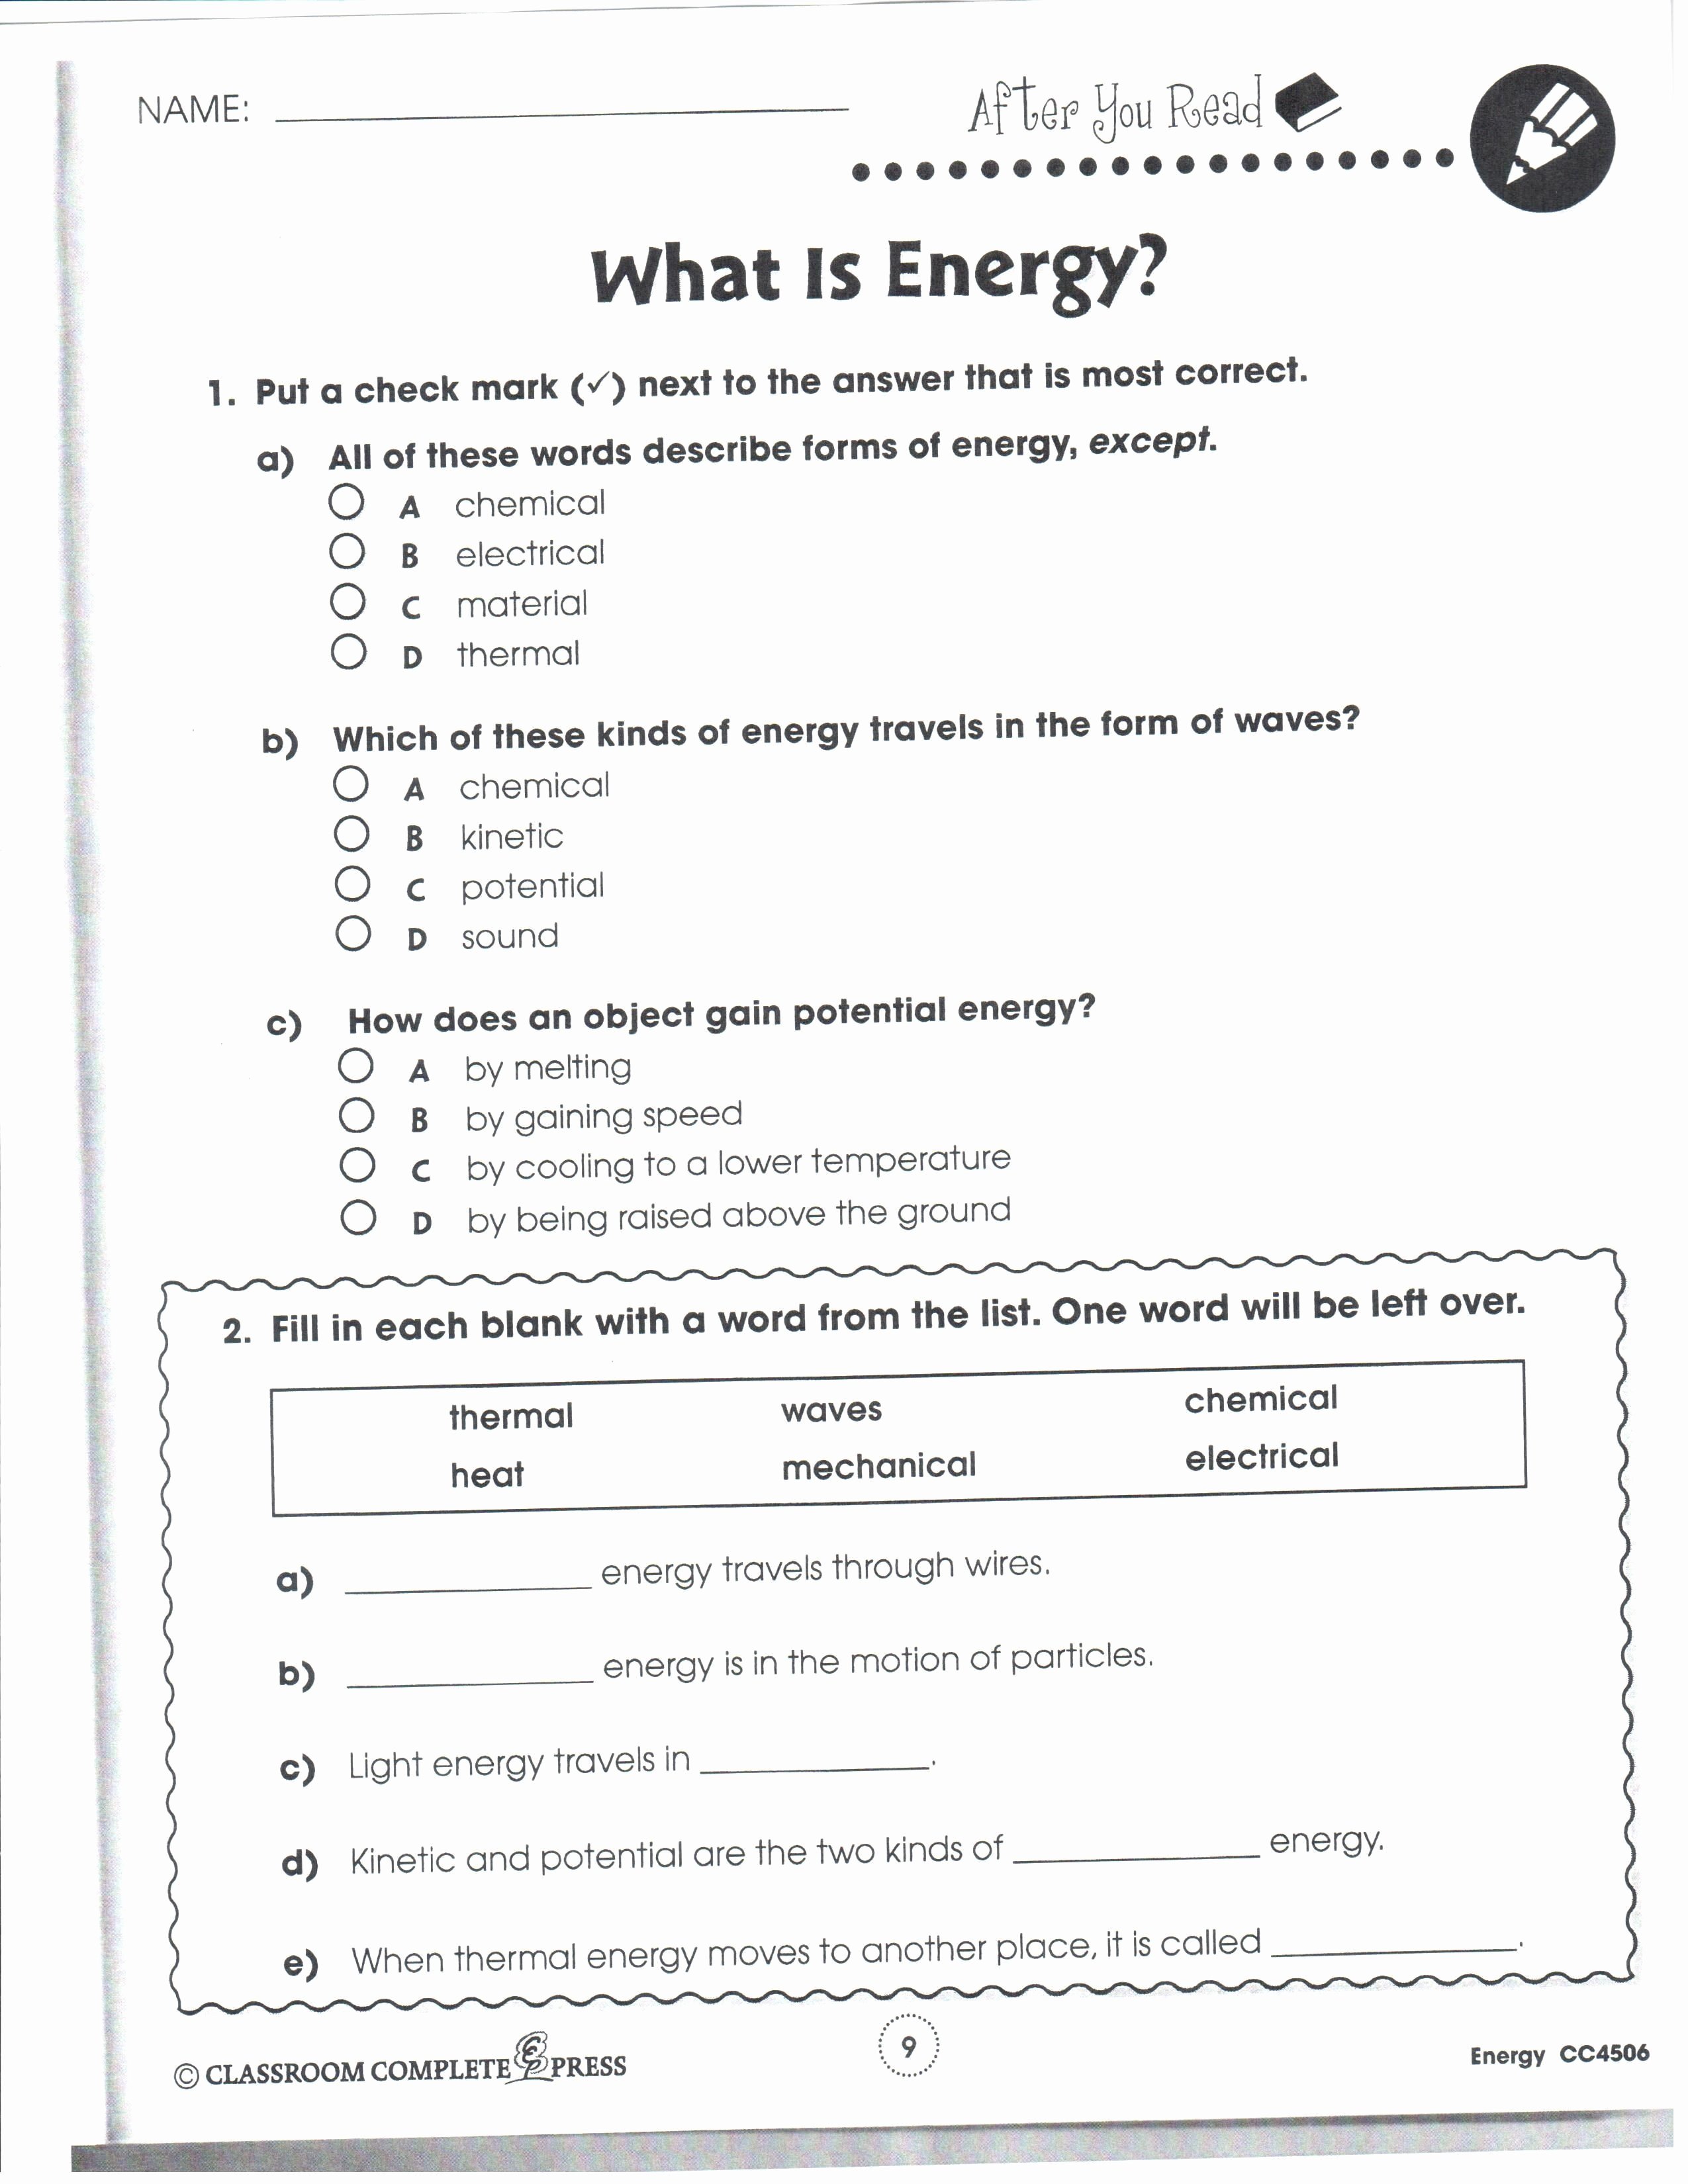 Newton&amp;#039;s 3rd Law Worksheet Awesome 71 Newton S Laws Worksheet Answers